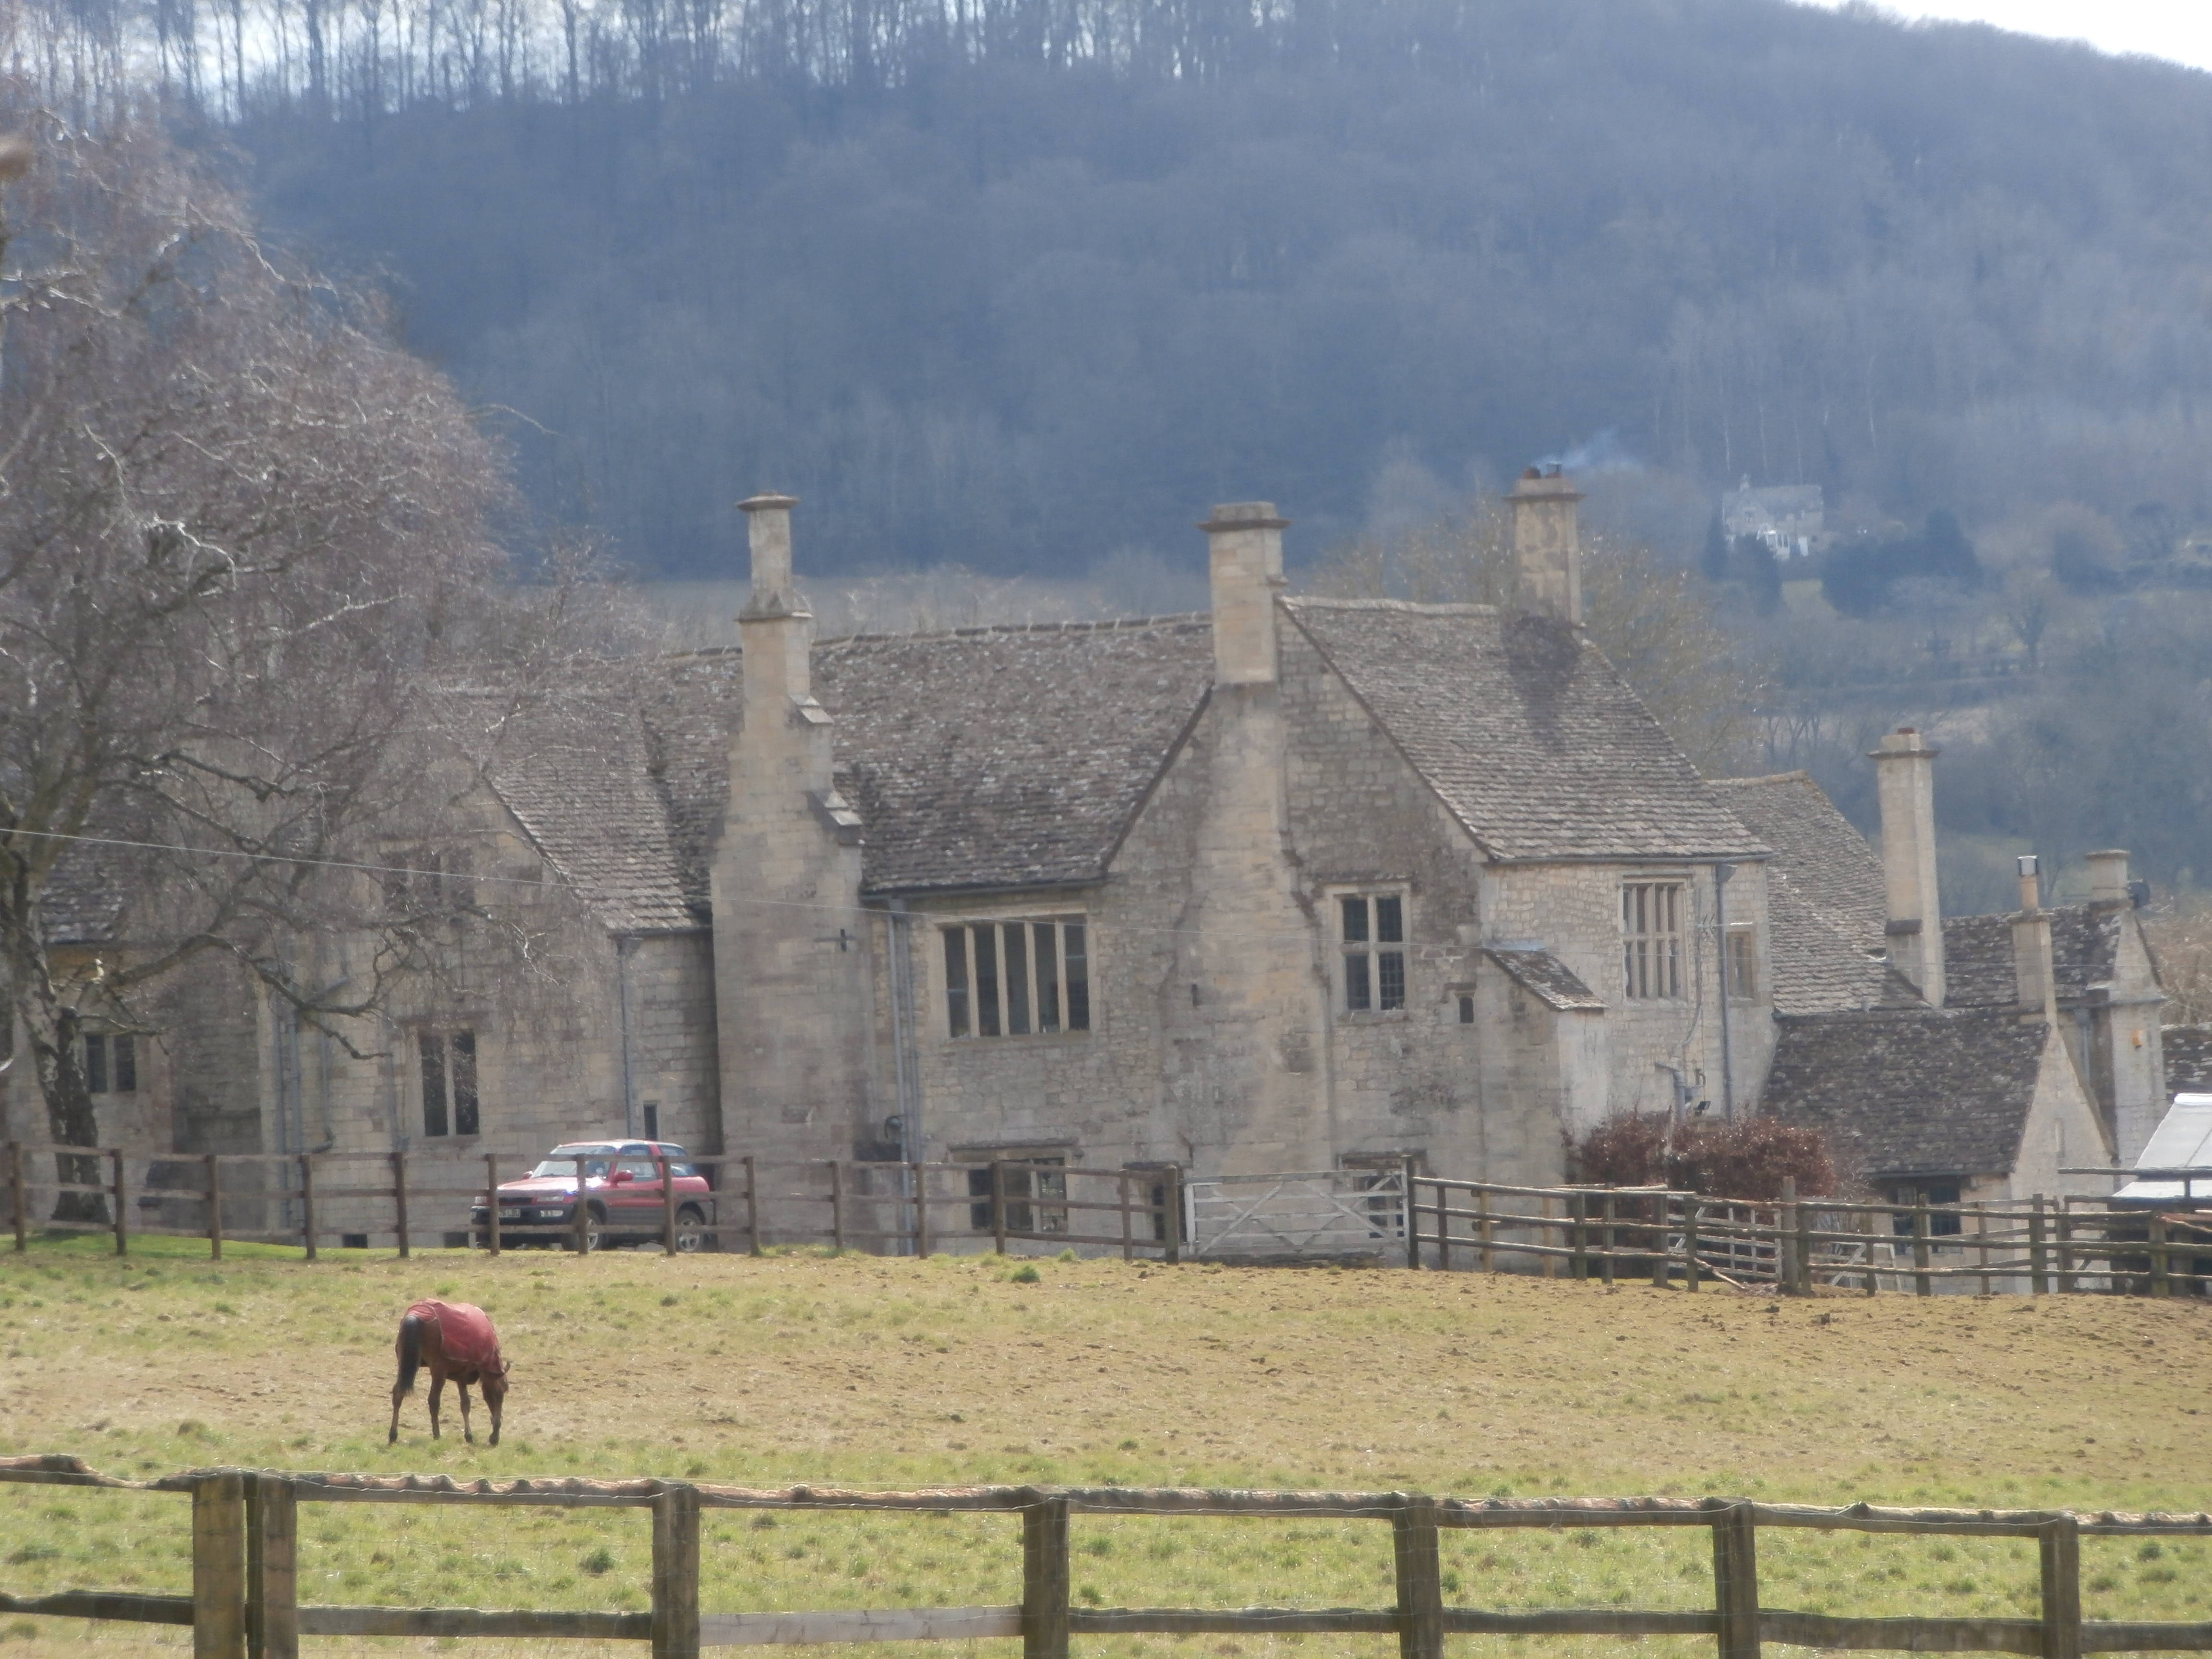 The Lodge, Painswick: a stop in the life of Anne Boleyn